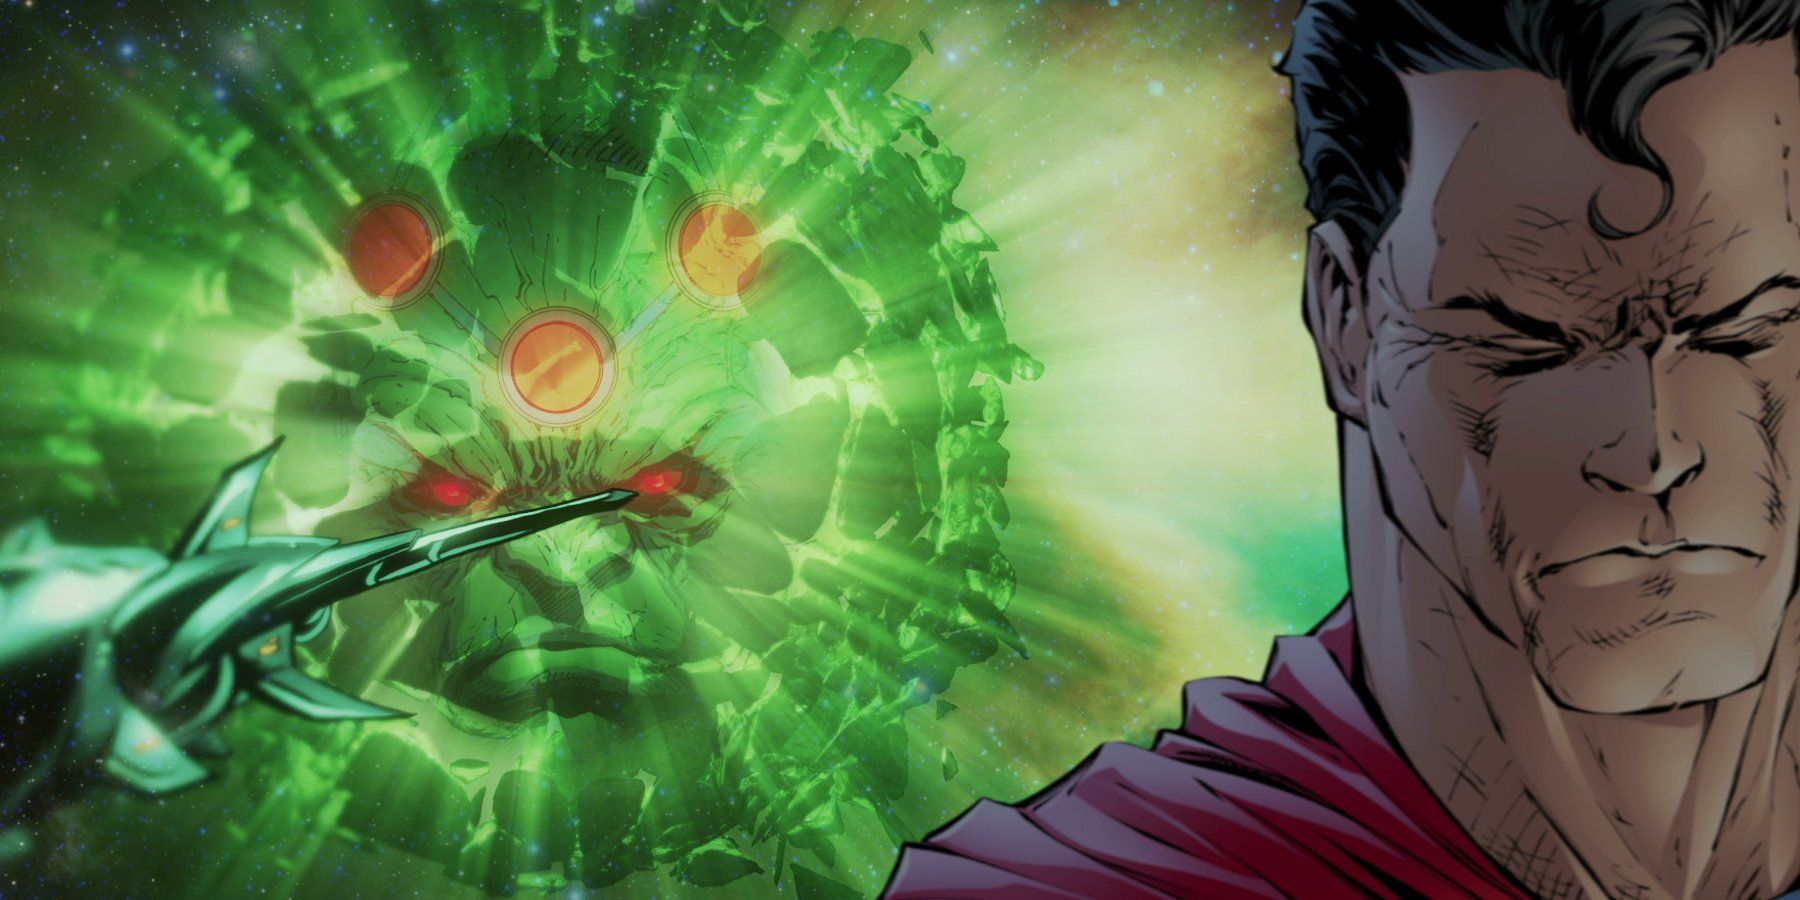 An image of Krypton exploding with Superman turned away from it